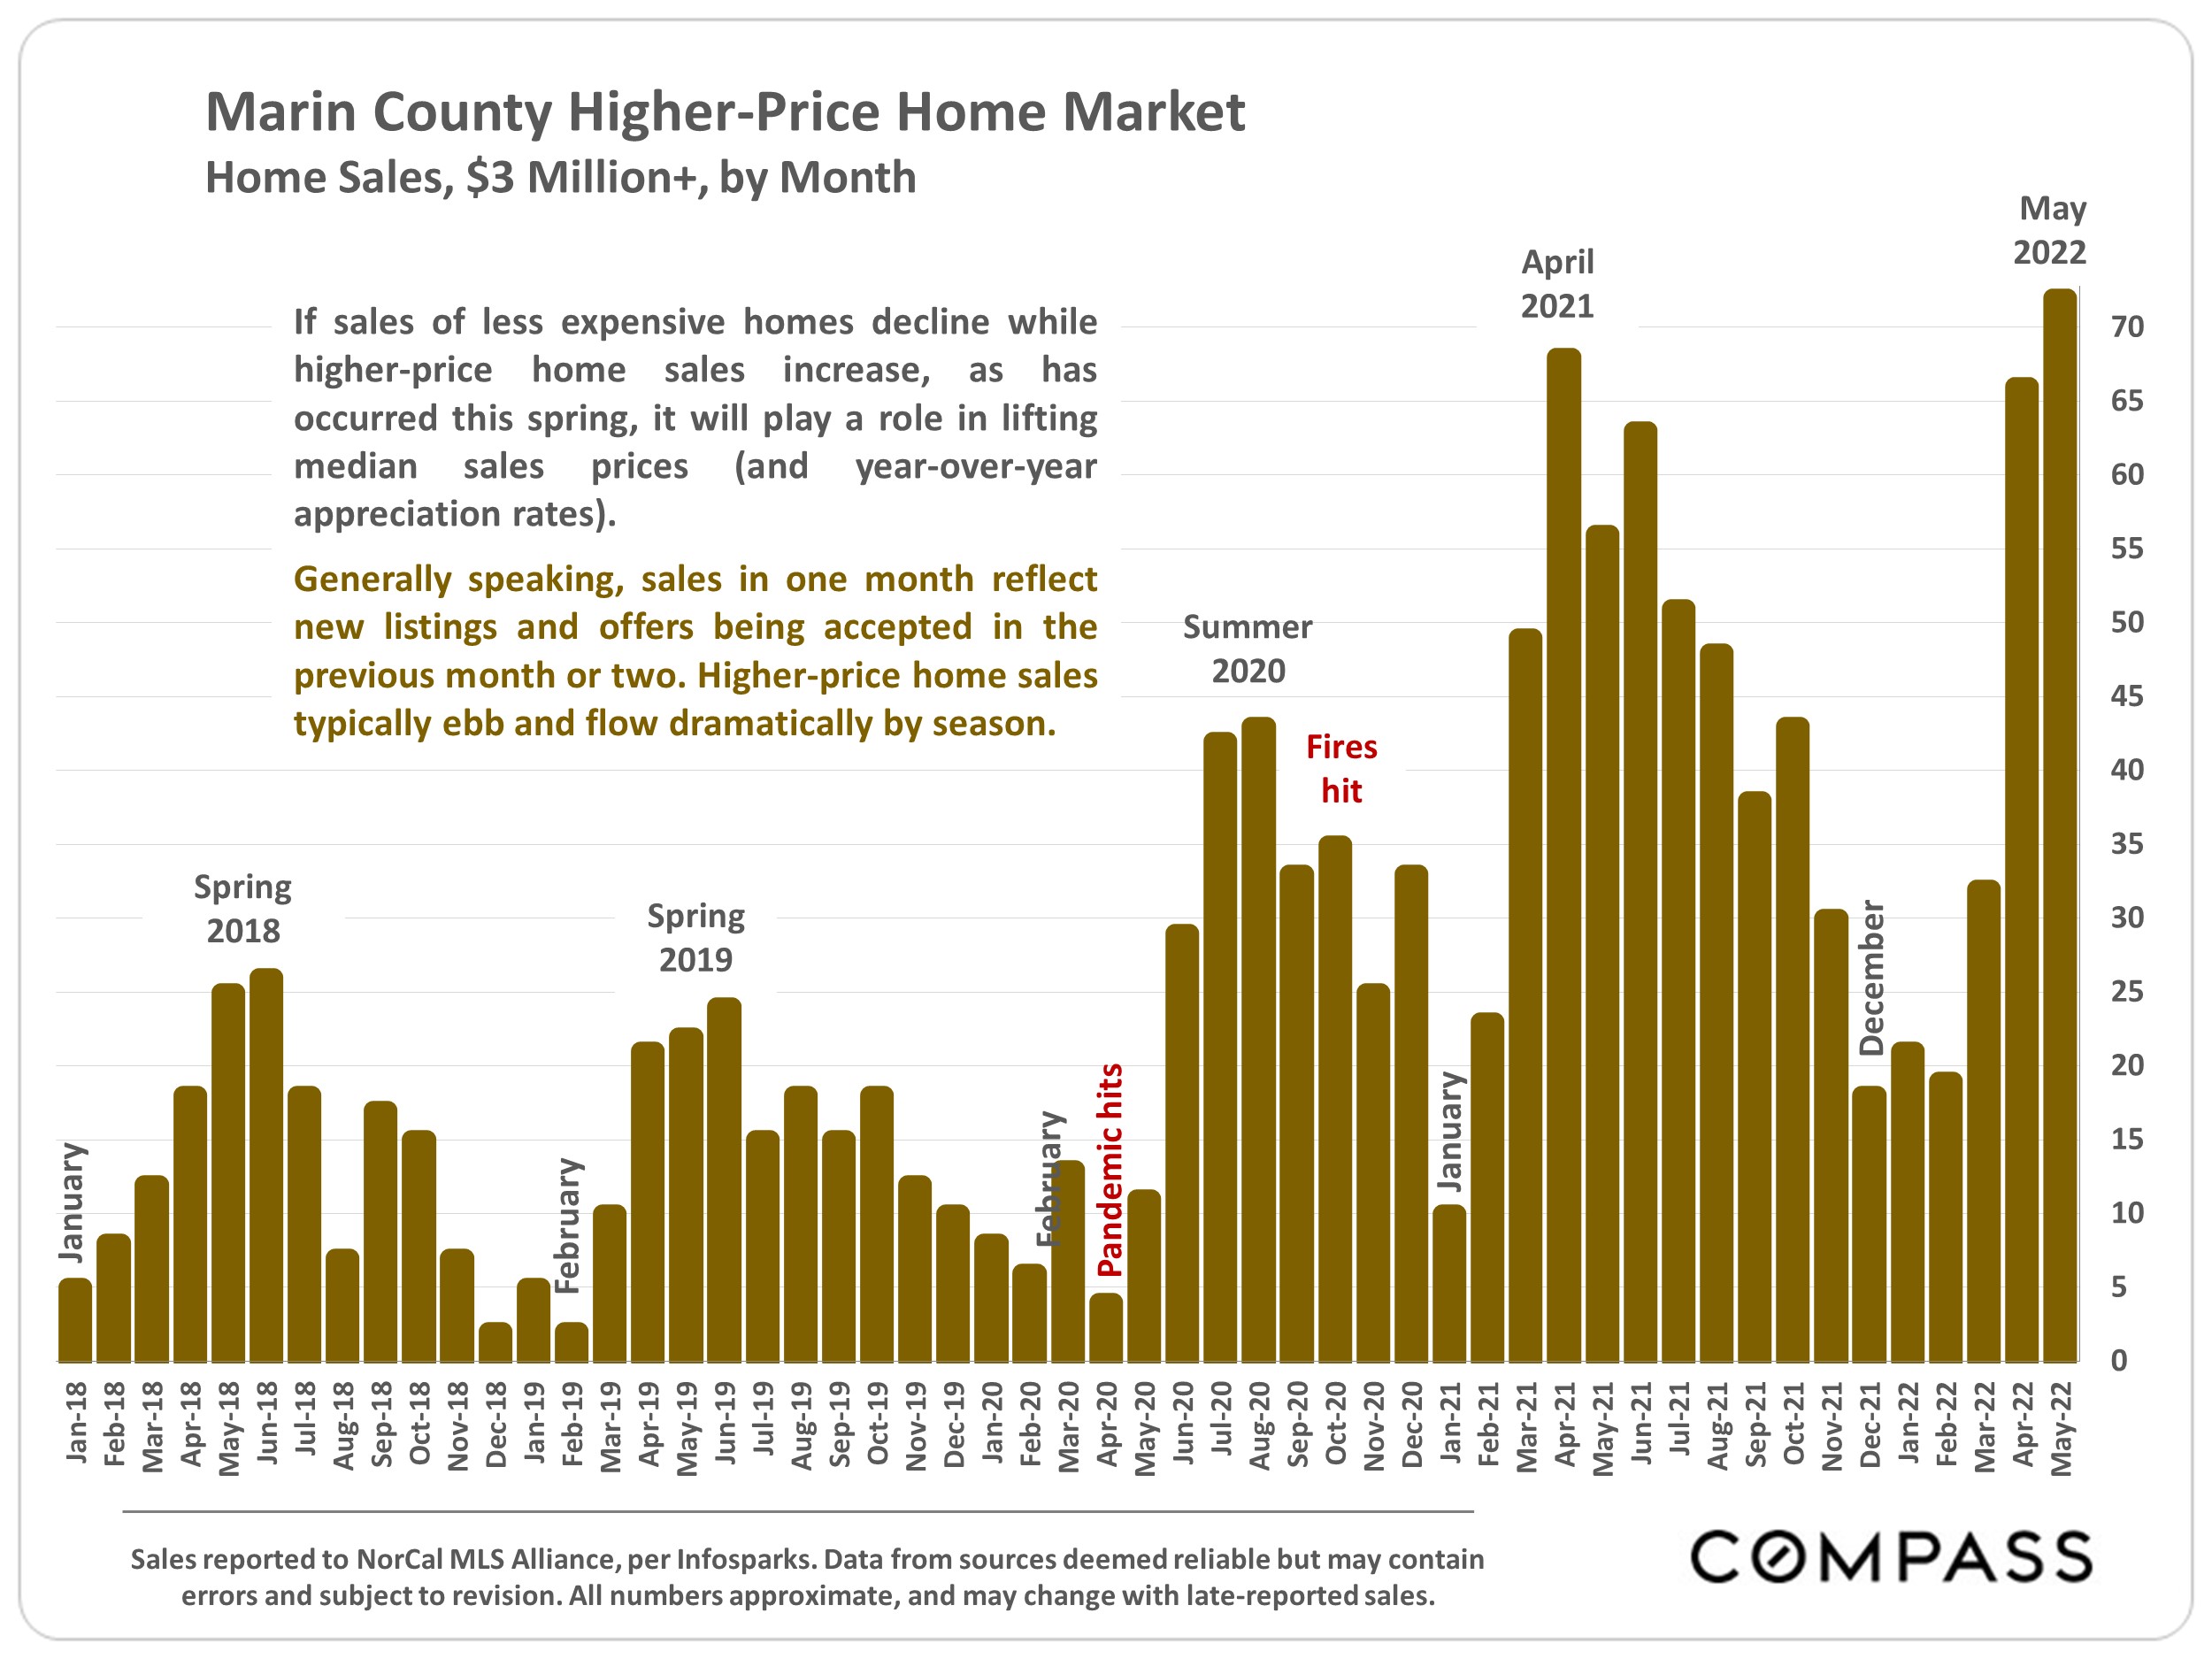 Marin County Higher-Price Home Market